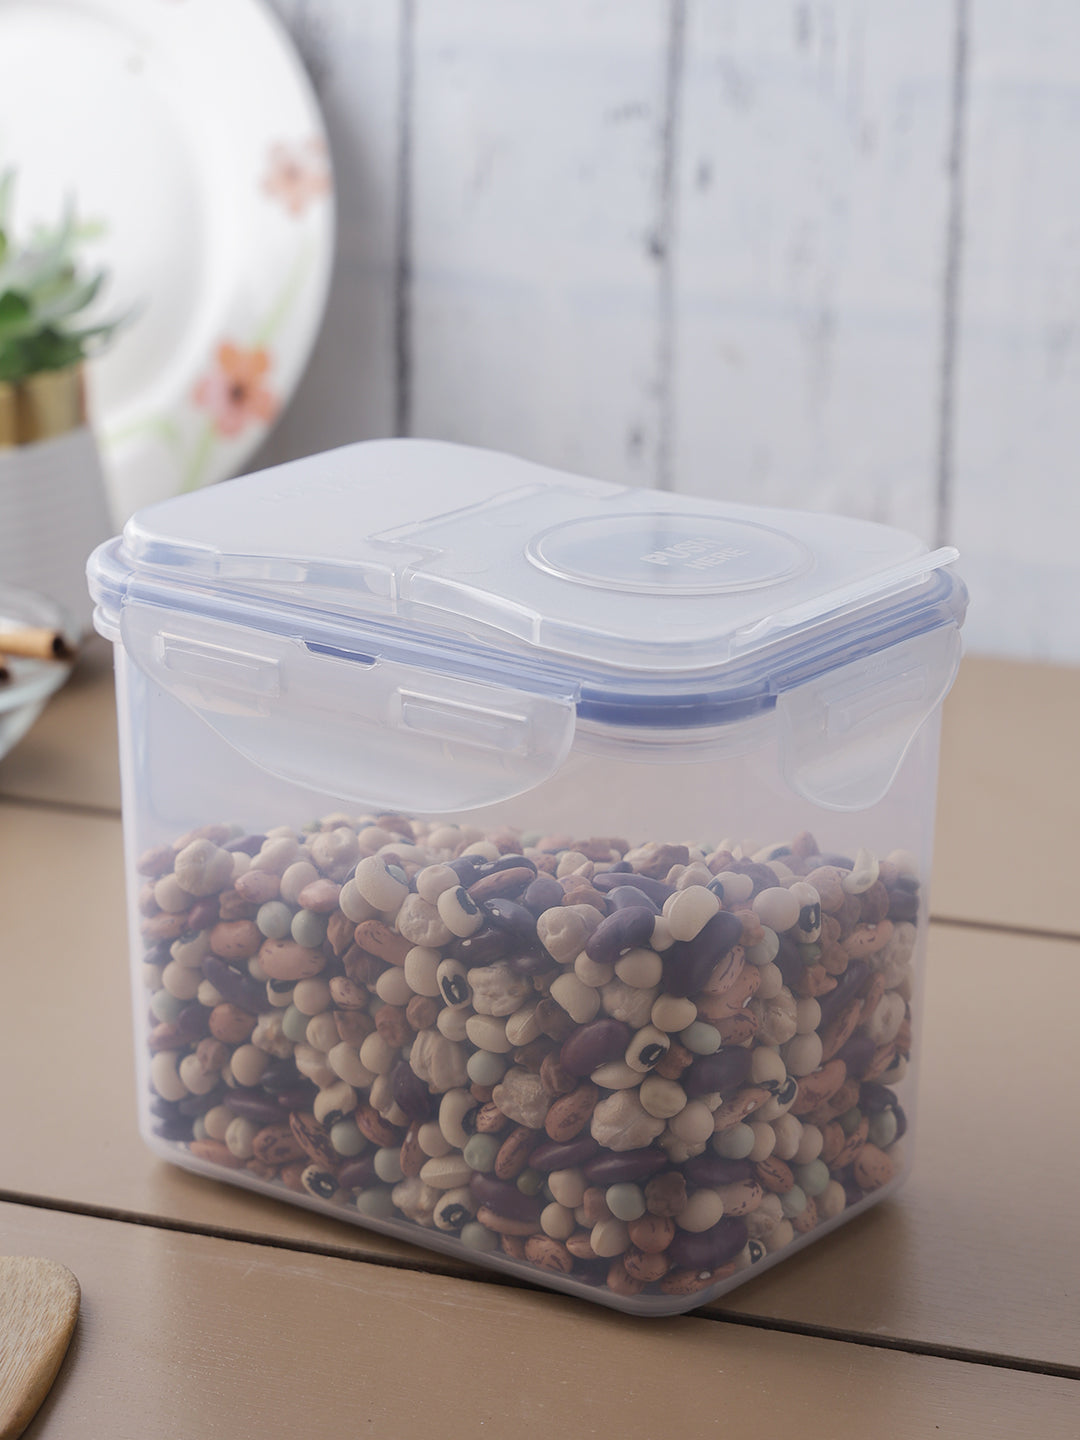 FLIP LID CONTAINER - 1.0LTR